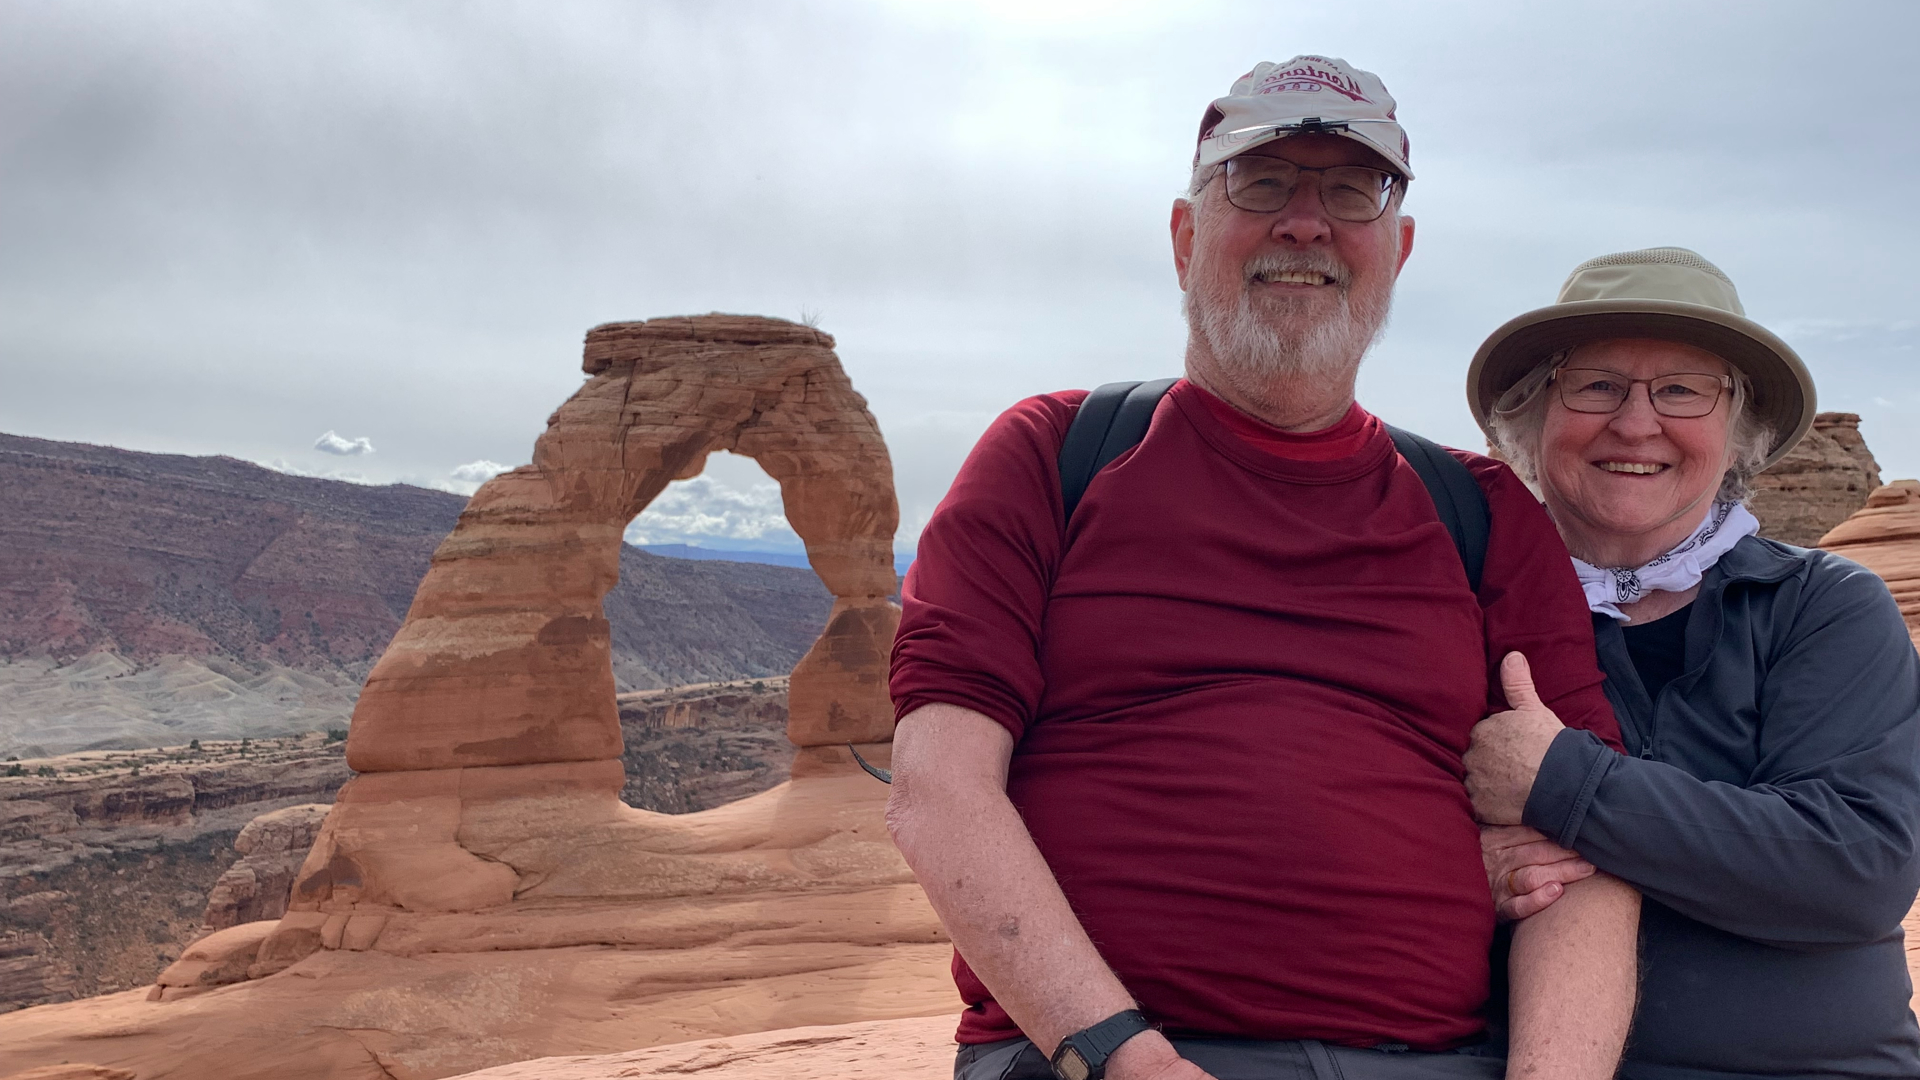 Hear firsthand how one rehab patient’s positivity and perseverance helped her conquer hiking trails out West after surviving heart surgery and cancer.   